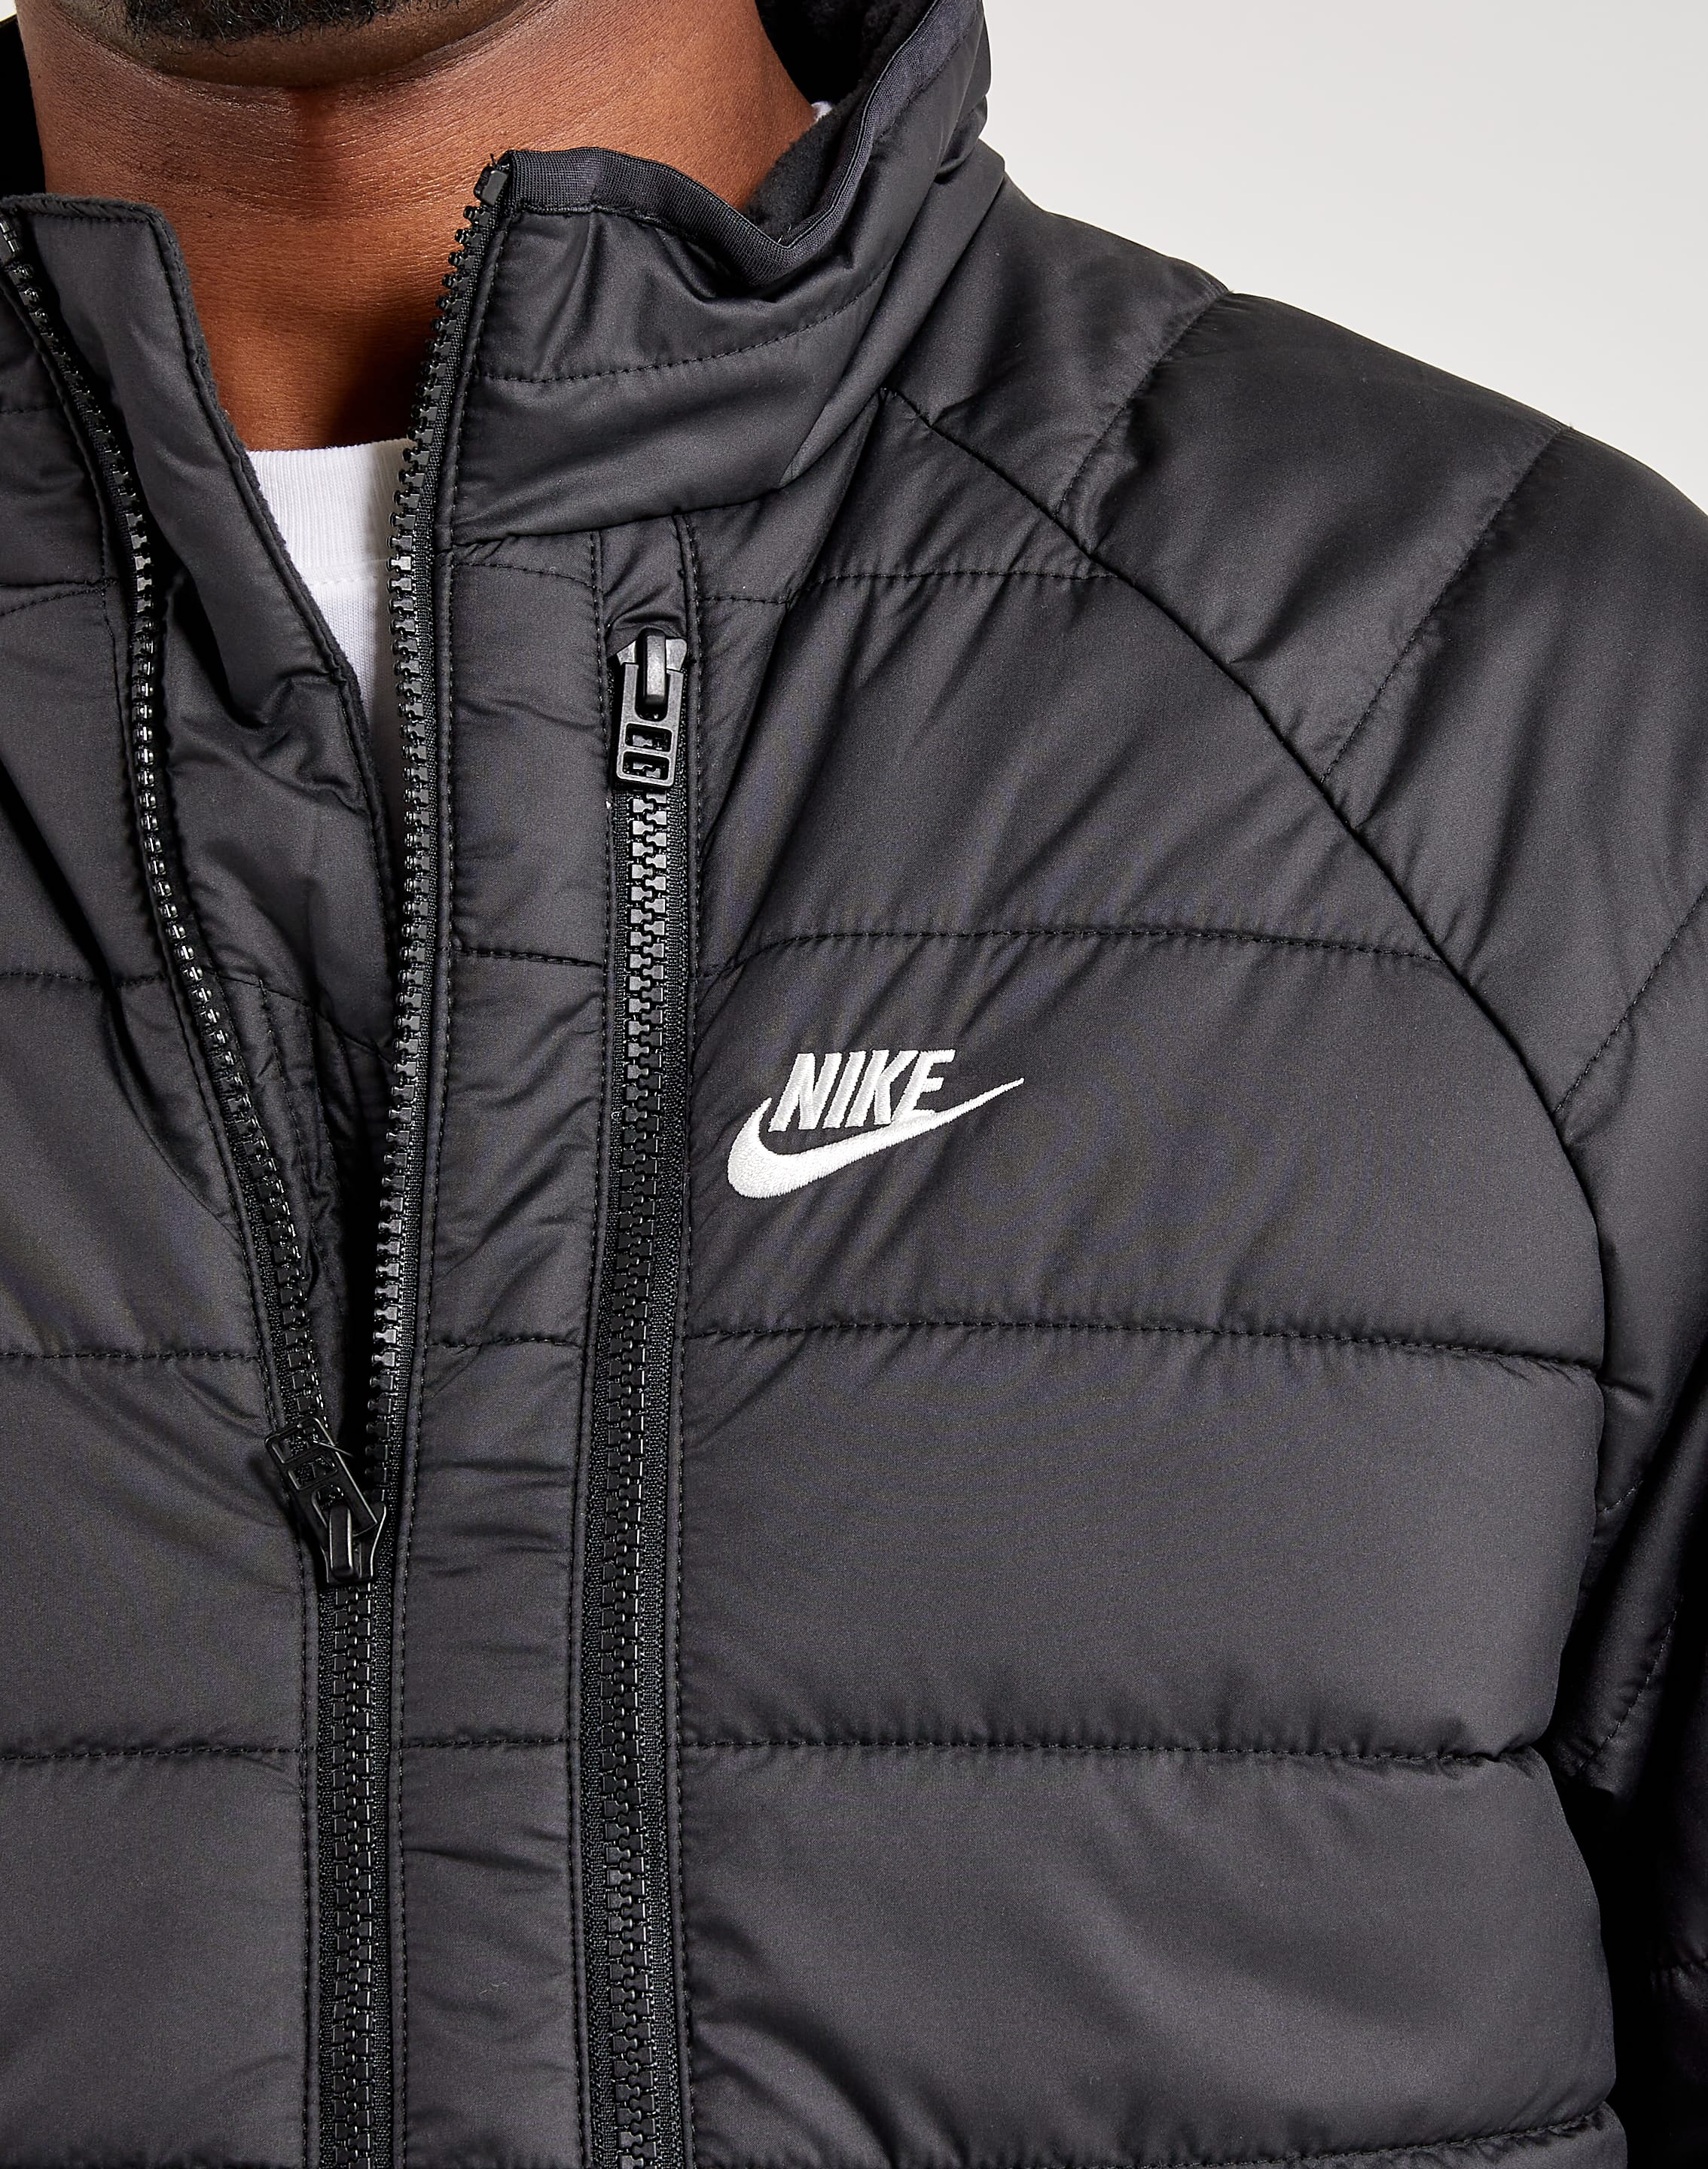 Jackets and Outerwear Tagged NIKE Page 2 - Millennium Shoes